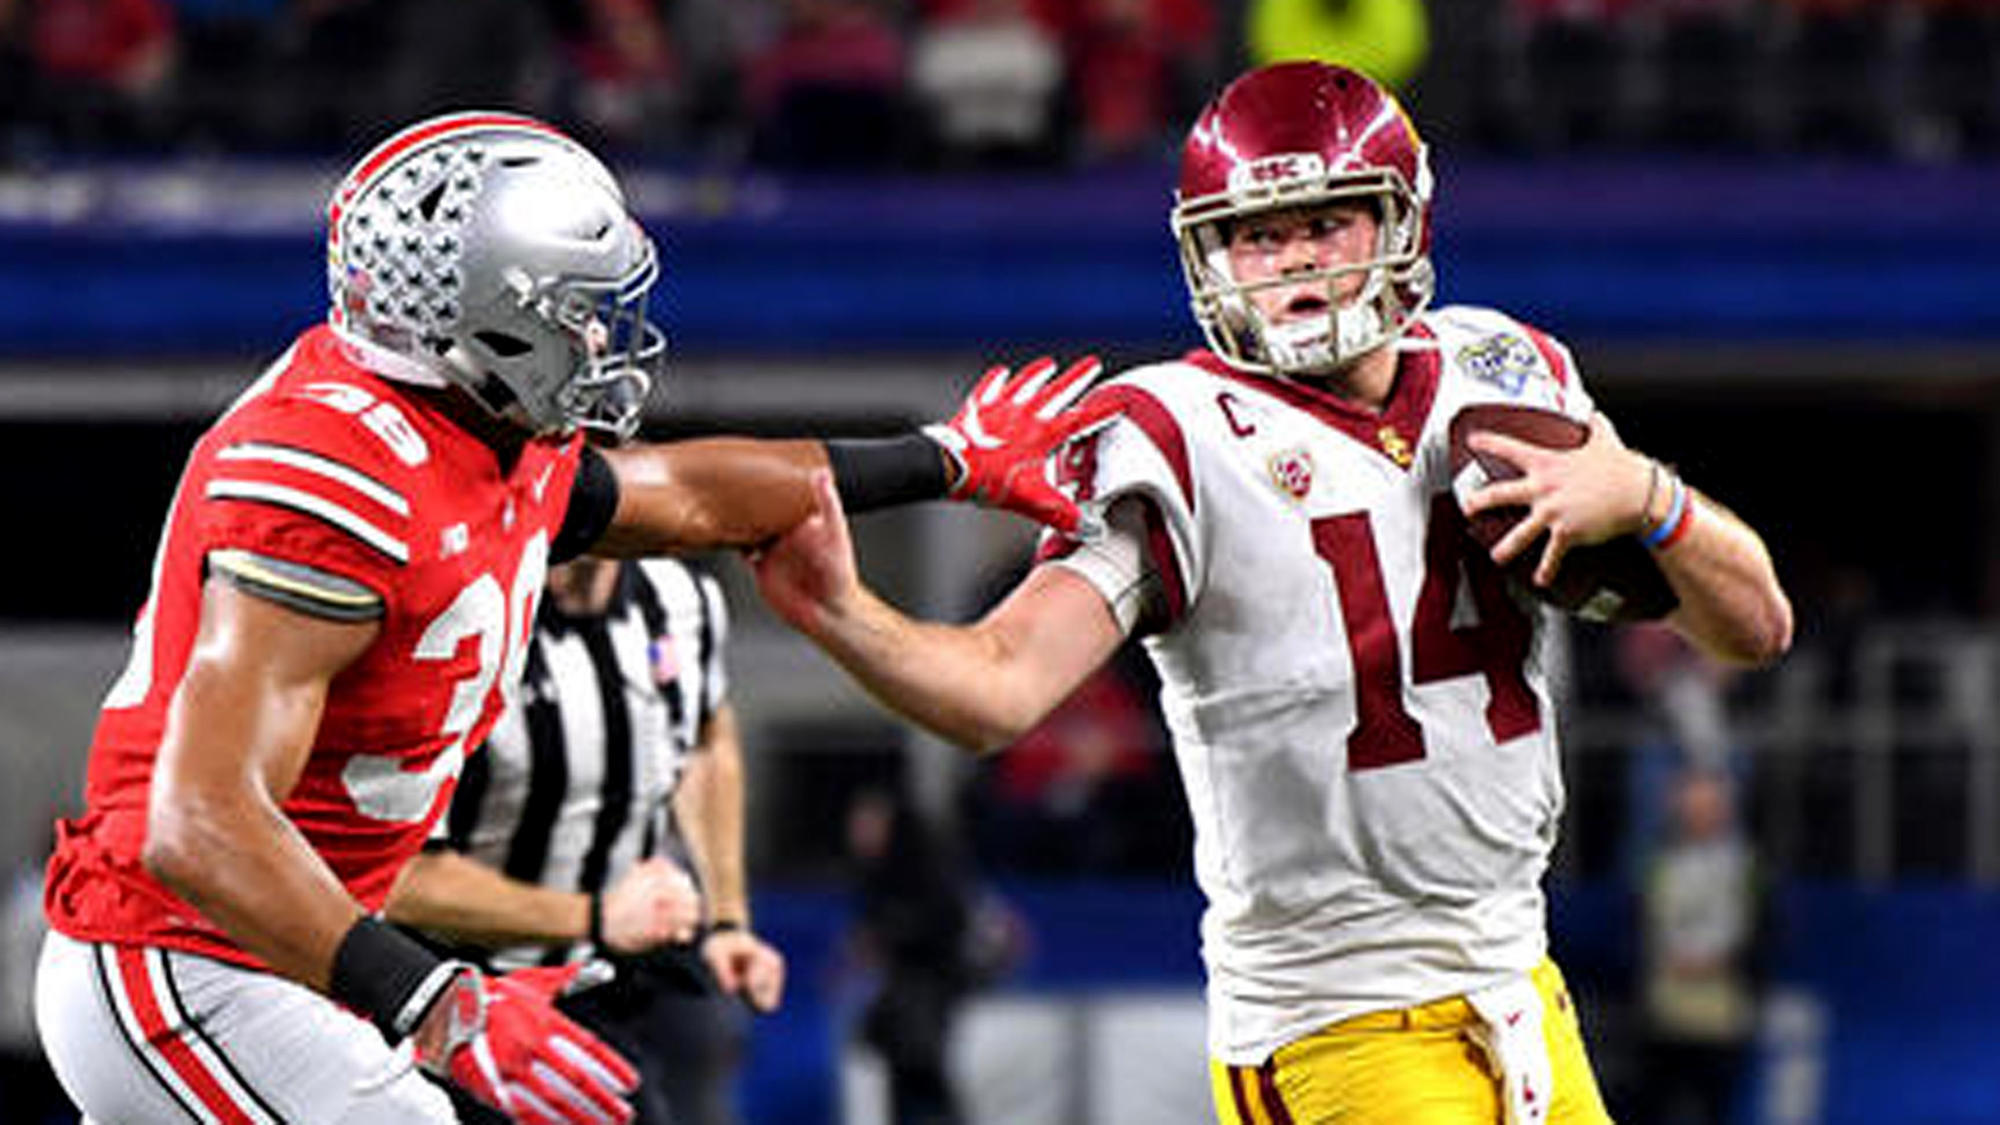 Sam Darnold's swan song in the Cotton Bowl was more of an ugly duckling